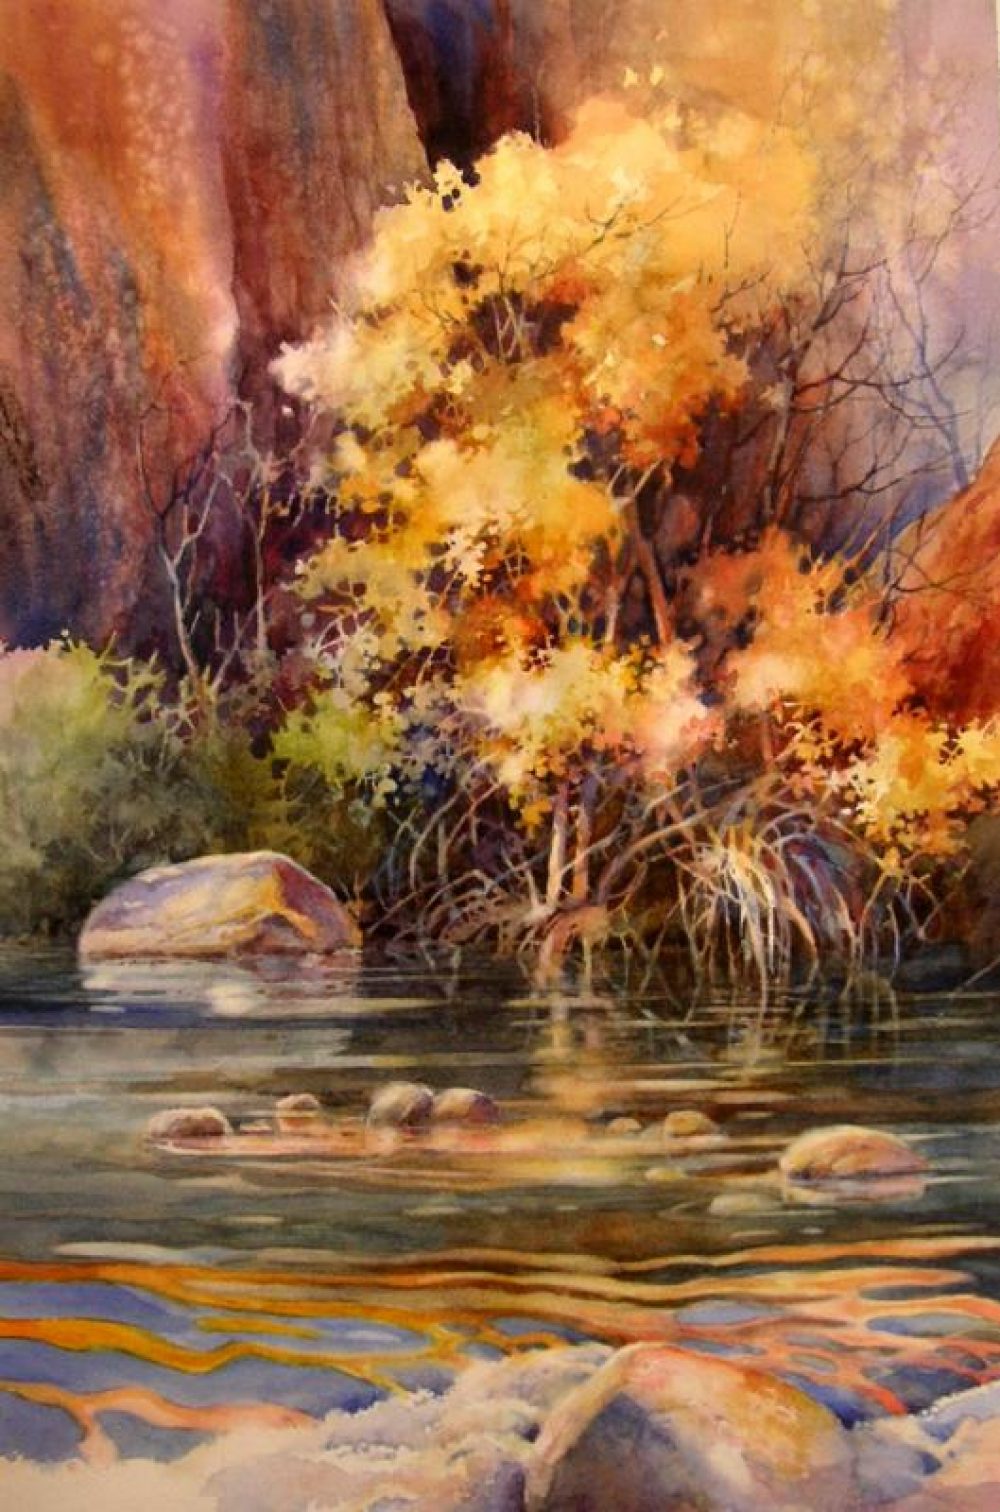 River Glow - Watercolor Painting of the Virgin River in Zion Canyon